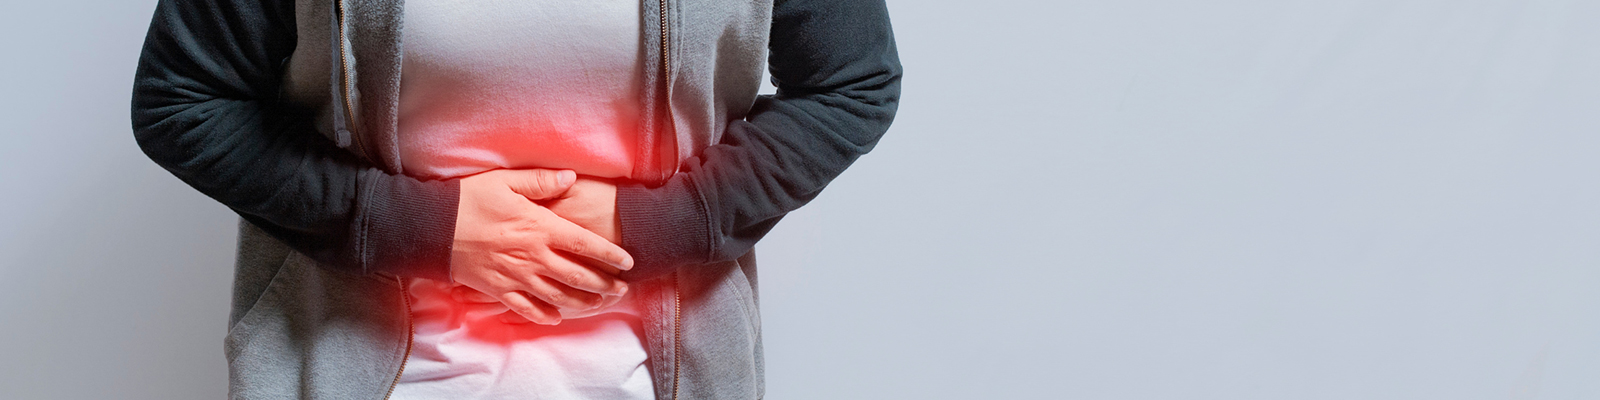 The Difference Between Crohn’s Disease and Ulcerative Colitis